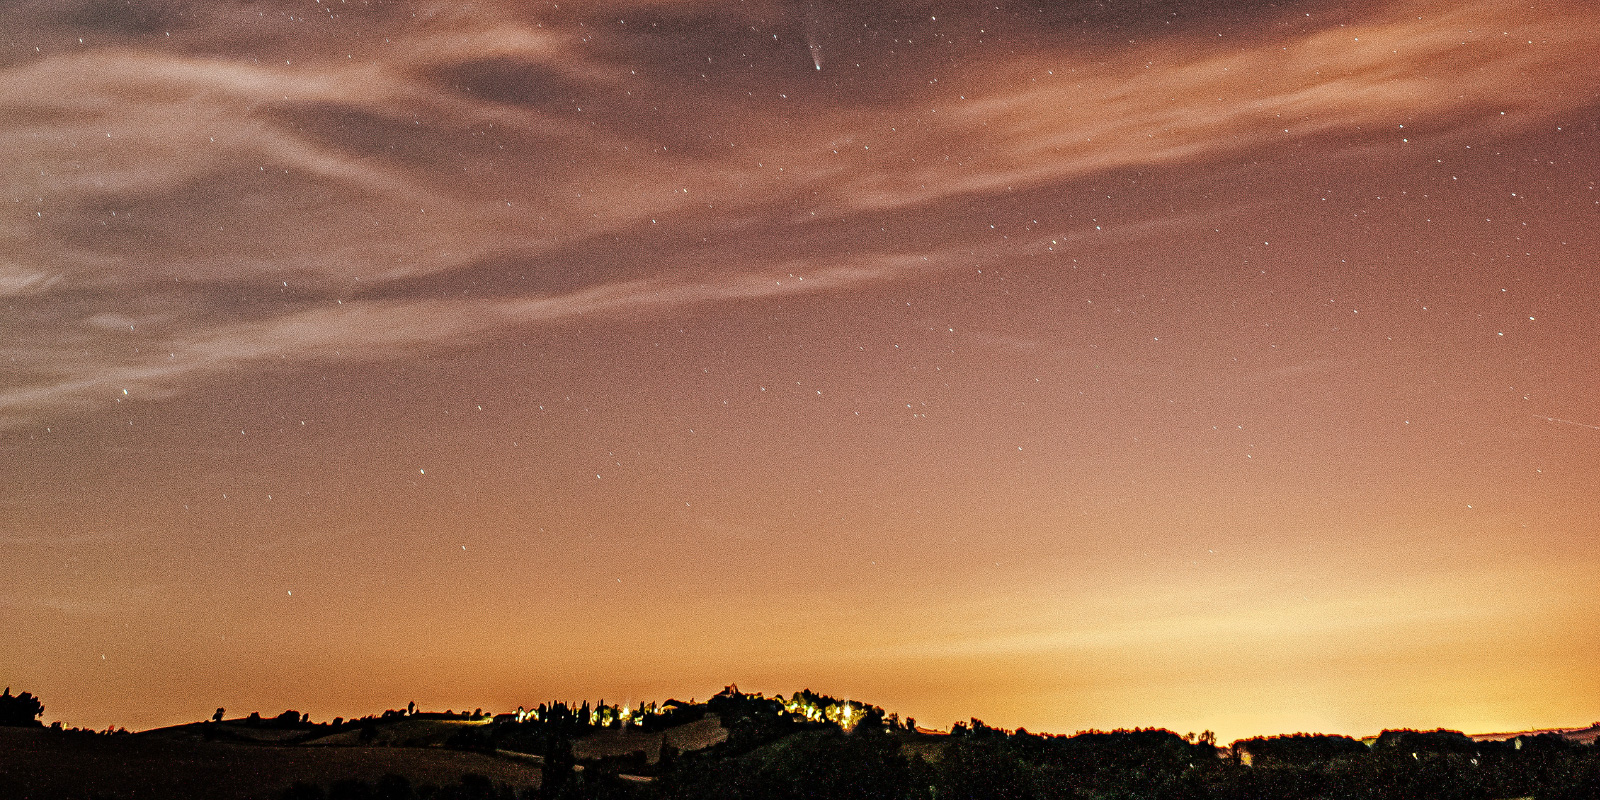 background image of a sunset and night sky